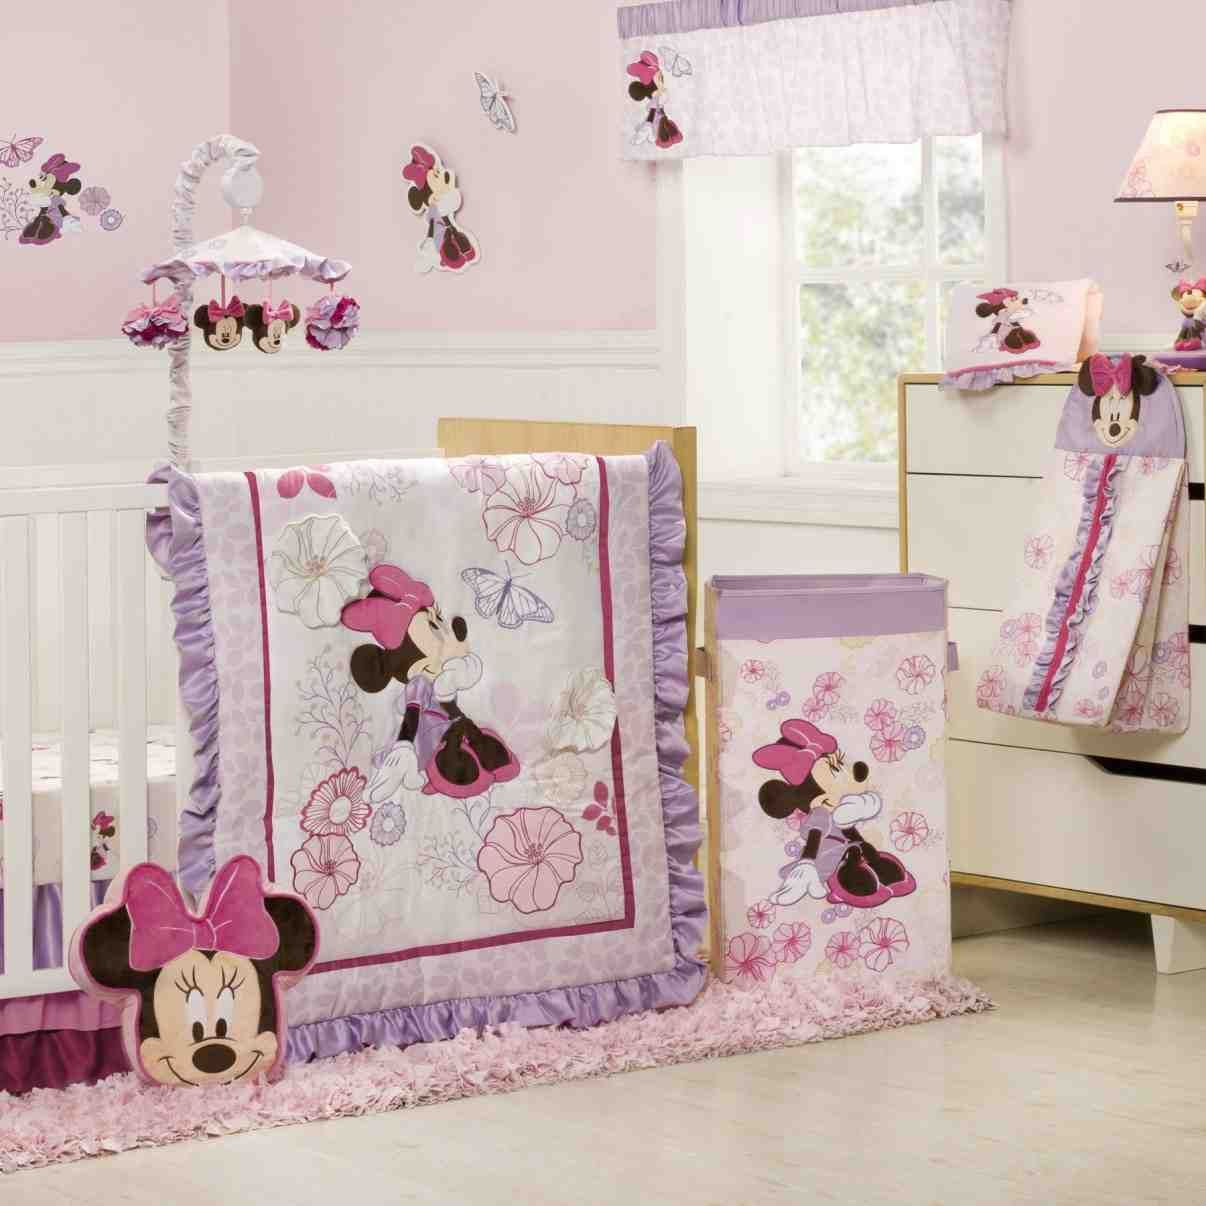 Minnie Mouse Baby Room Decor
 Minnie Mouse Baby Room Decor